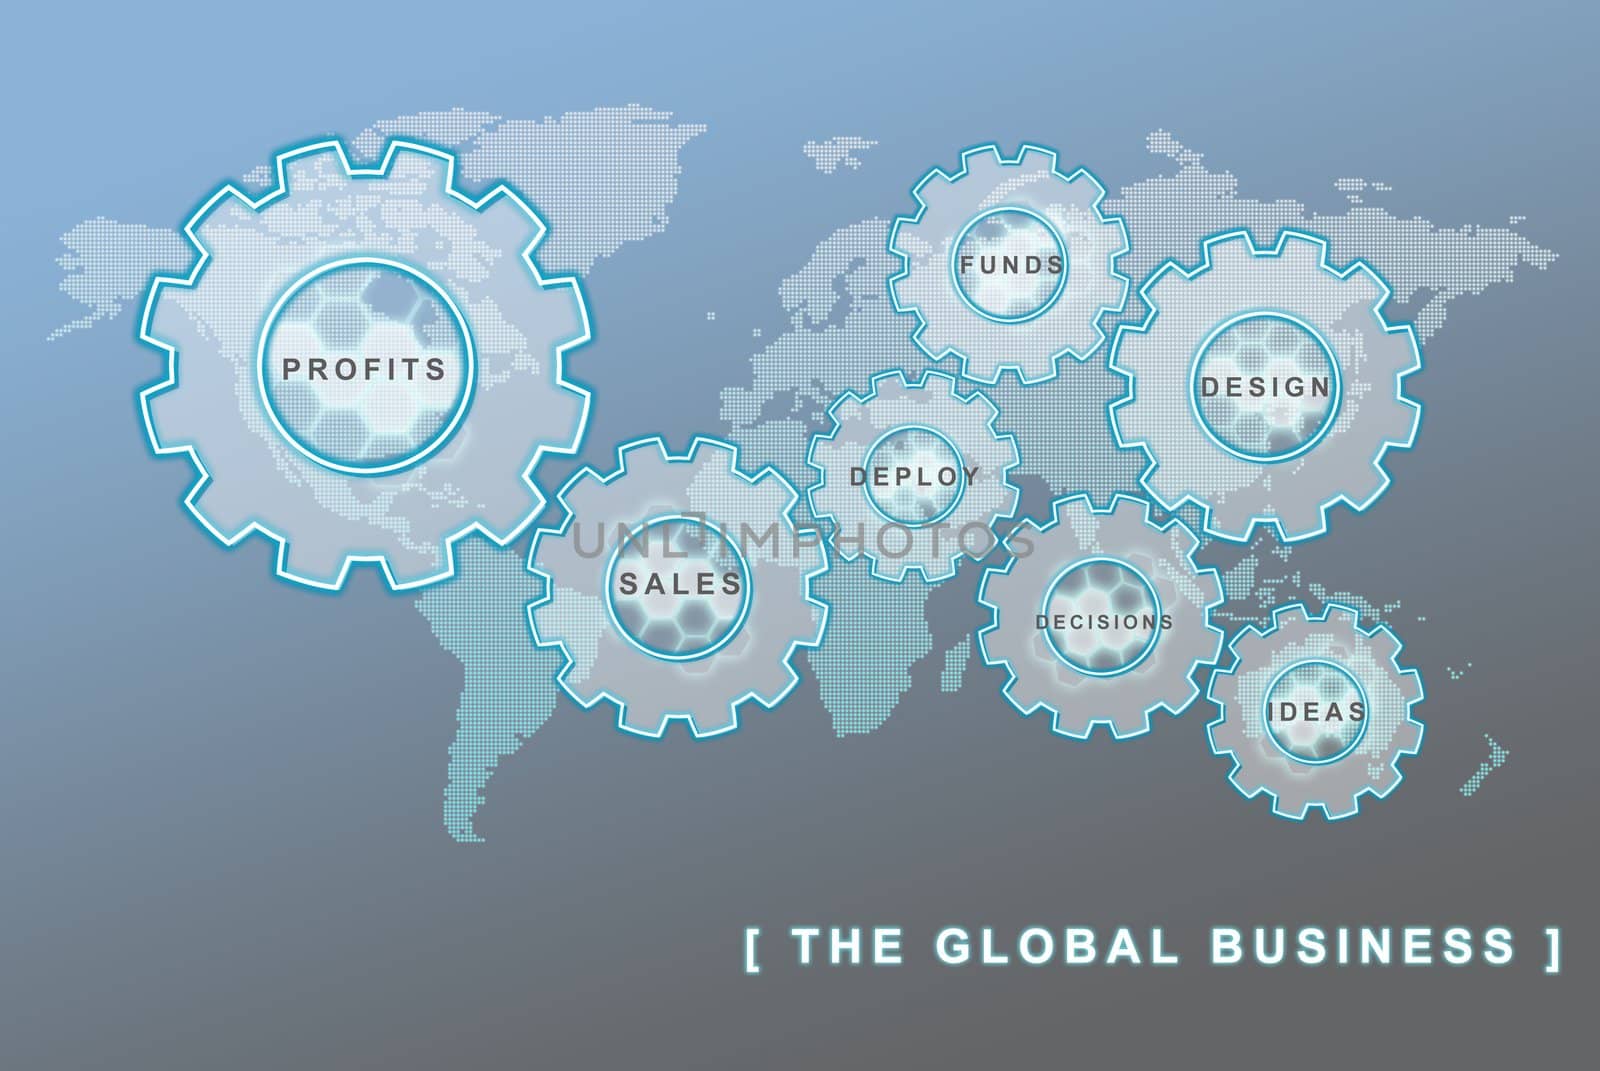 The global business concept by sasilsolutions